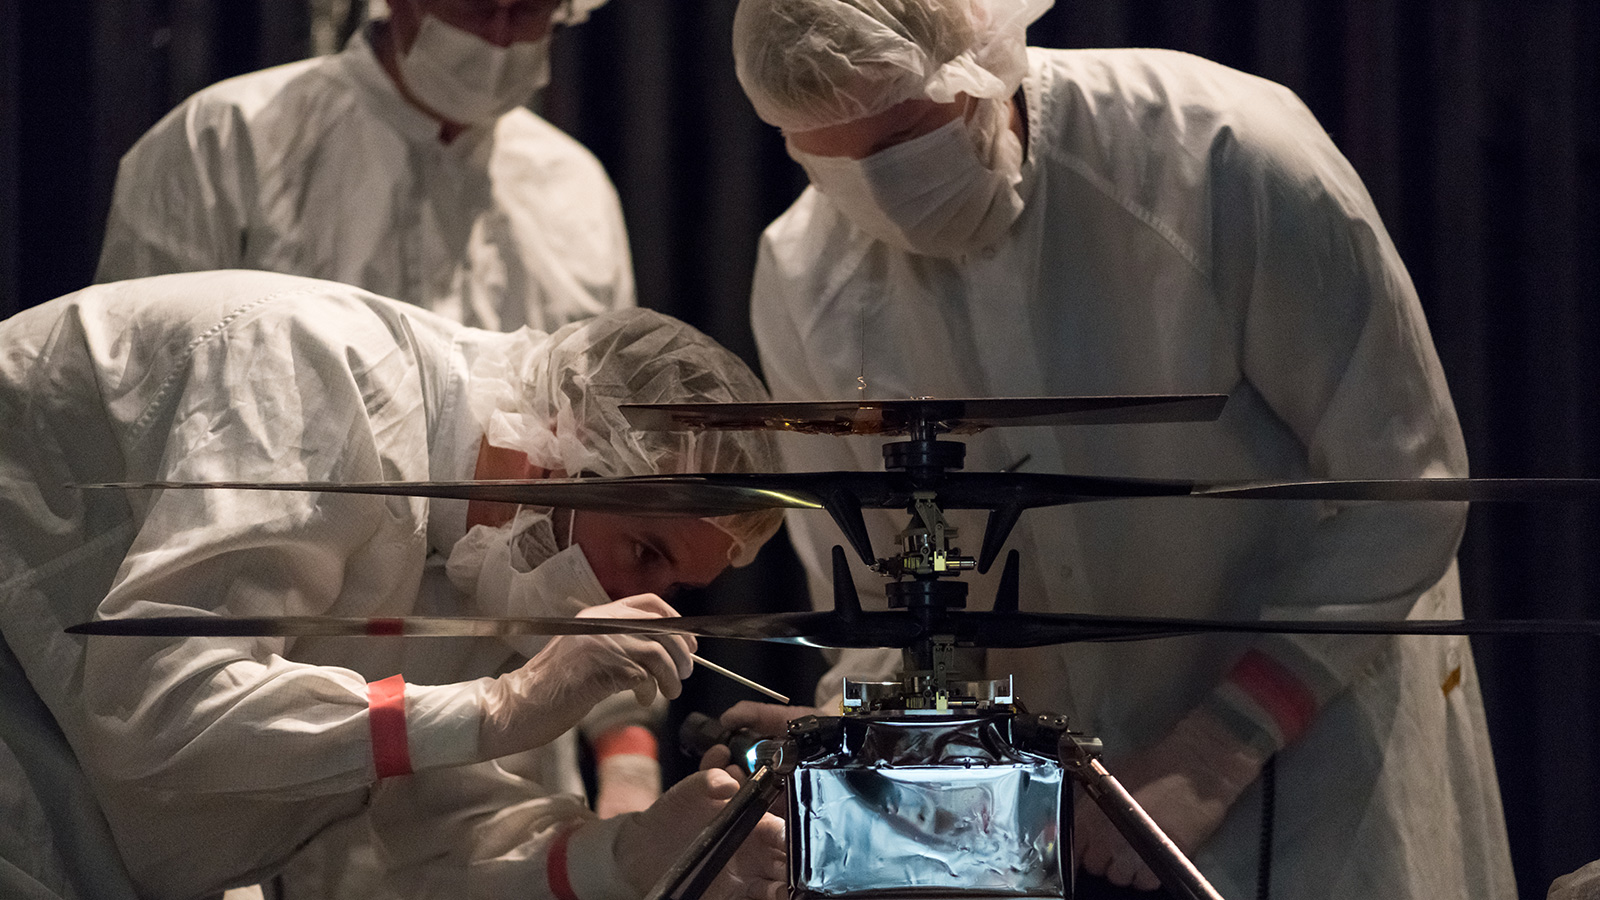 Members of NASA’s Mars Helicopter team attach a thermal film enclosure to the fuselage of the flight model.